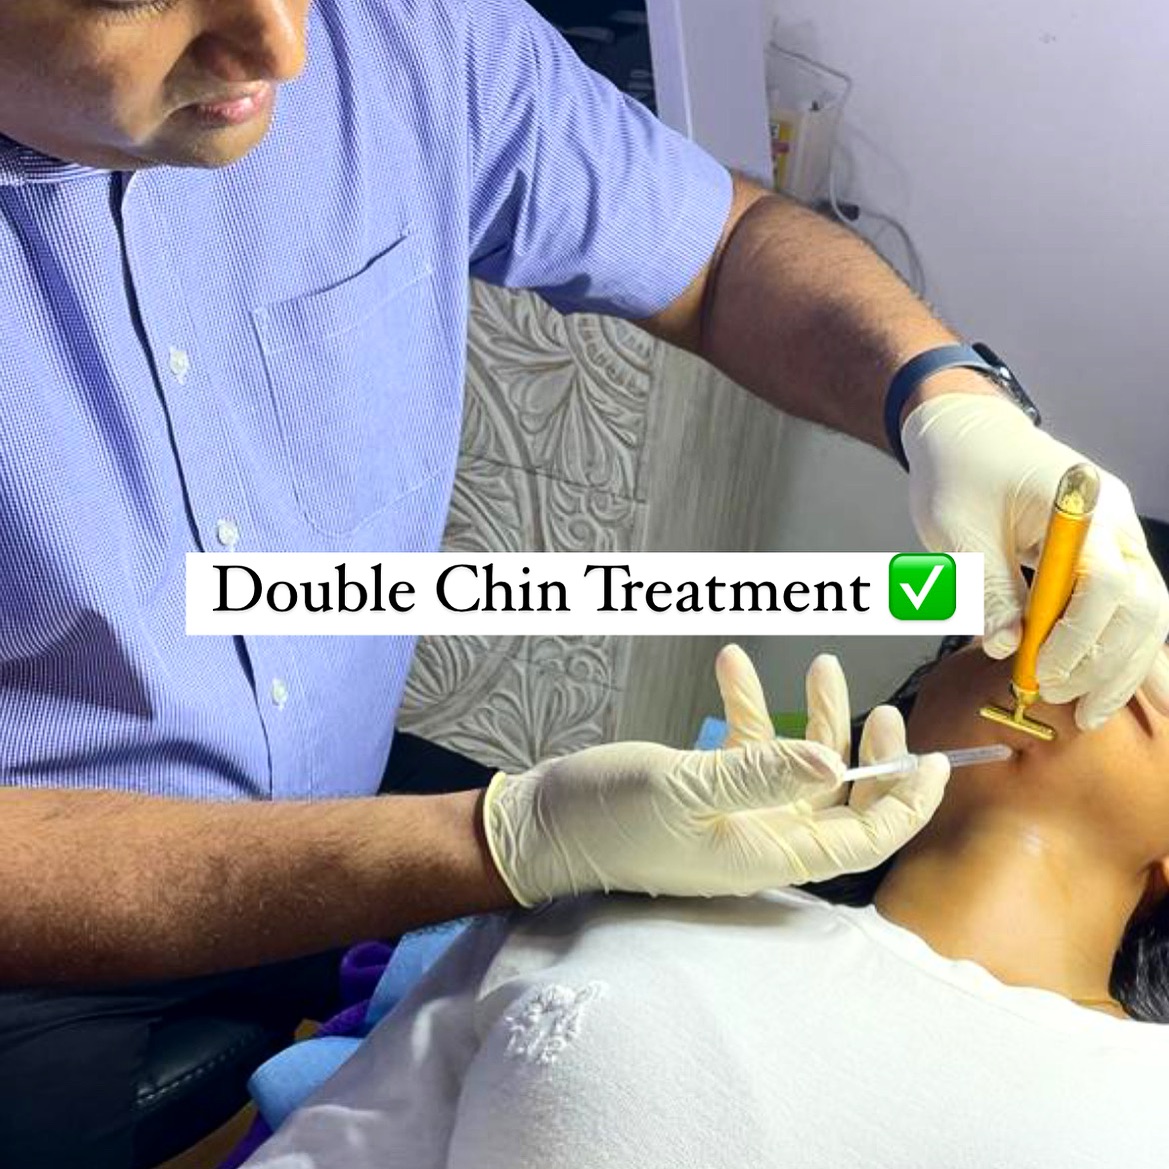 Double Chin Treatment is now available at #mycosmeticcliniclk
100% effective and painless
Lasting results
Contact us on our hotline +94 (71)0247000 to place your appointment
#skincare #mycosmeticcliniclk #doublechin #doublechintreatment #aestheticclinic